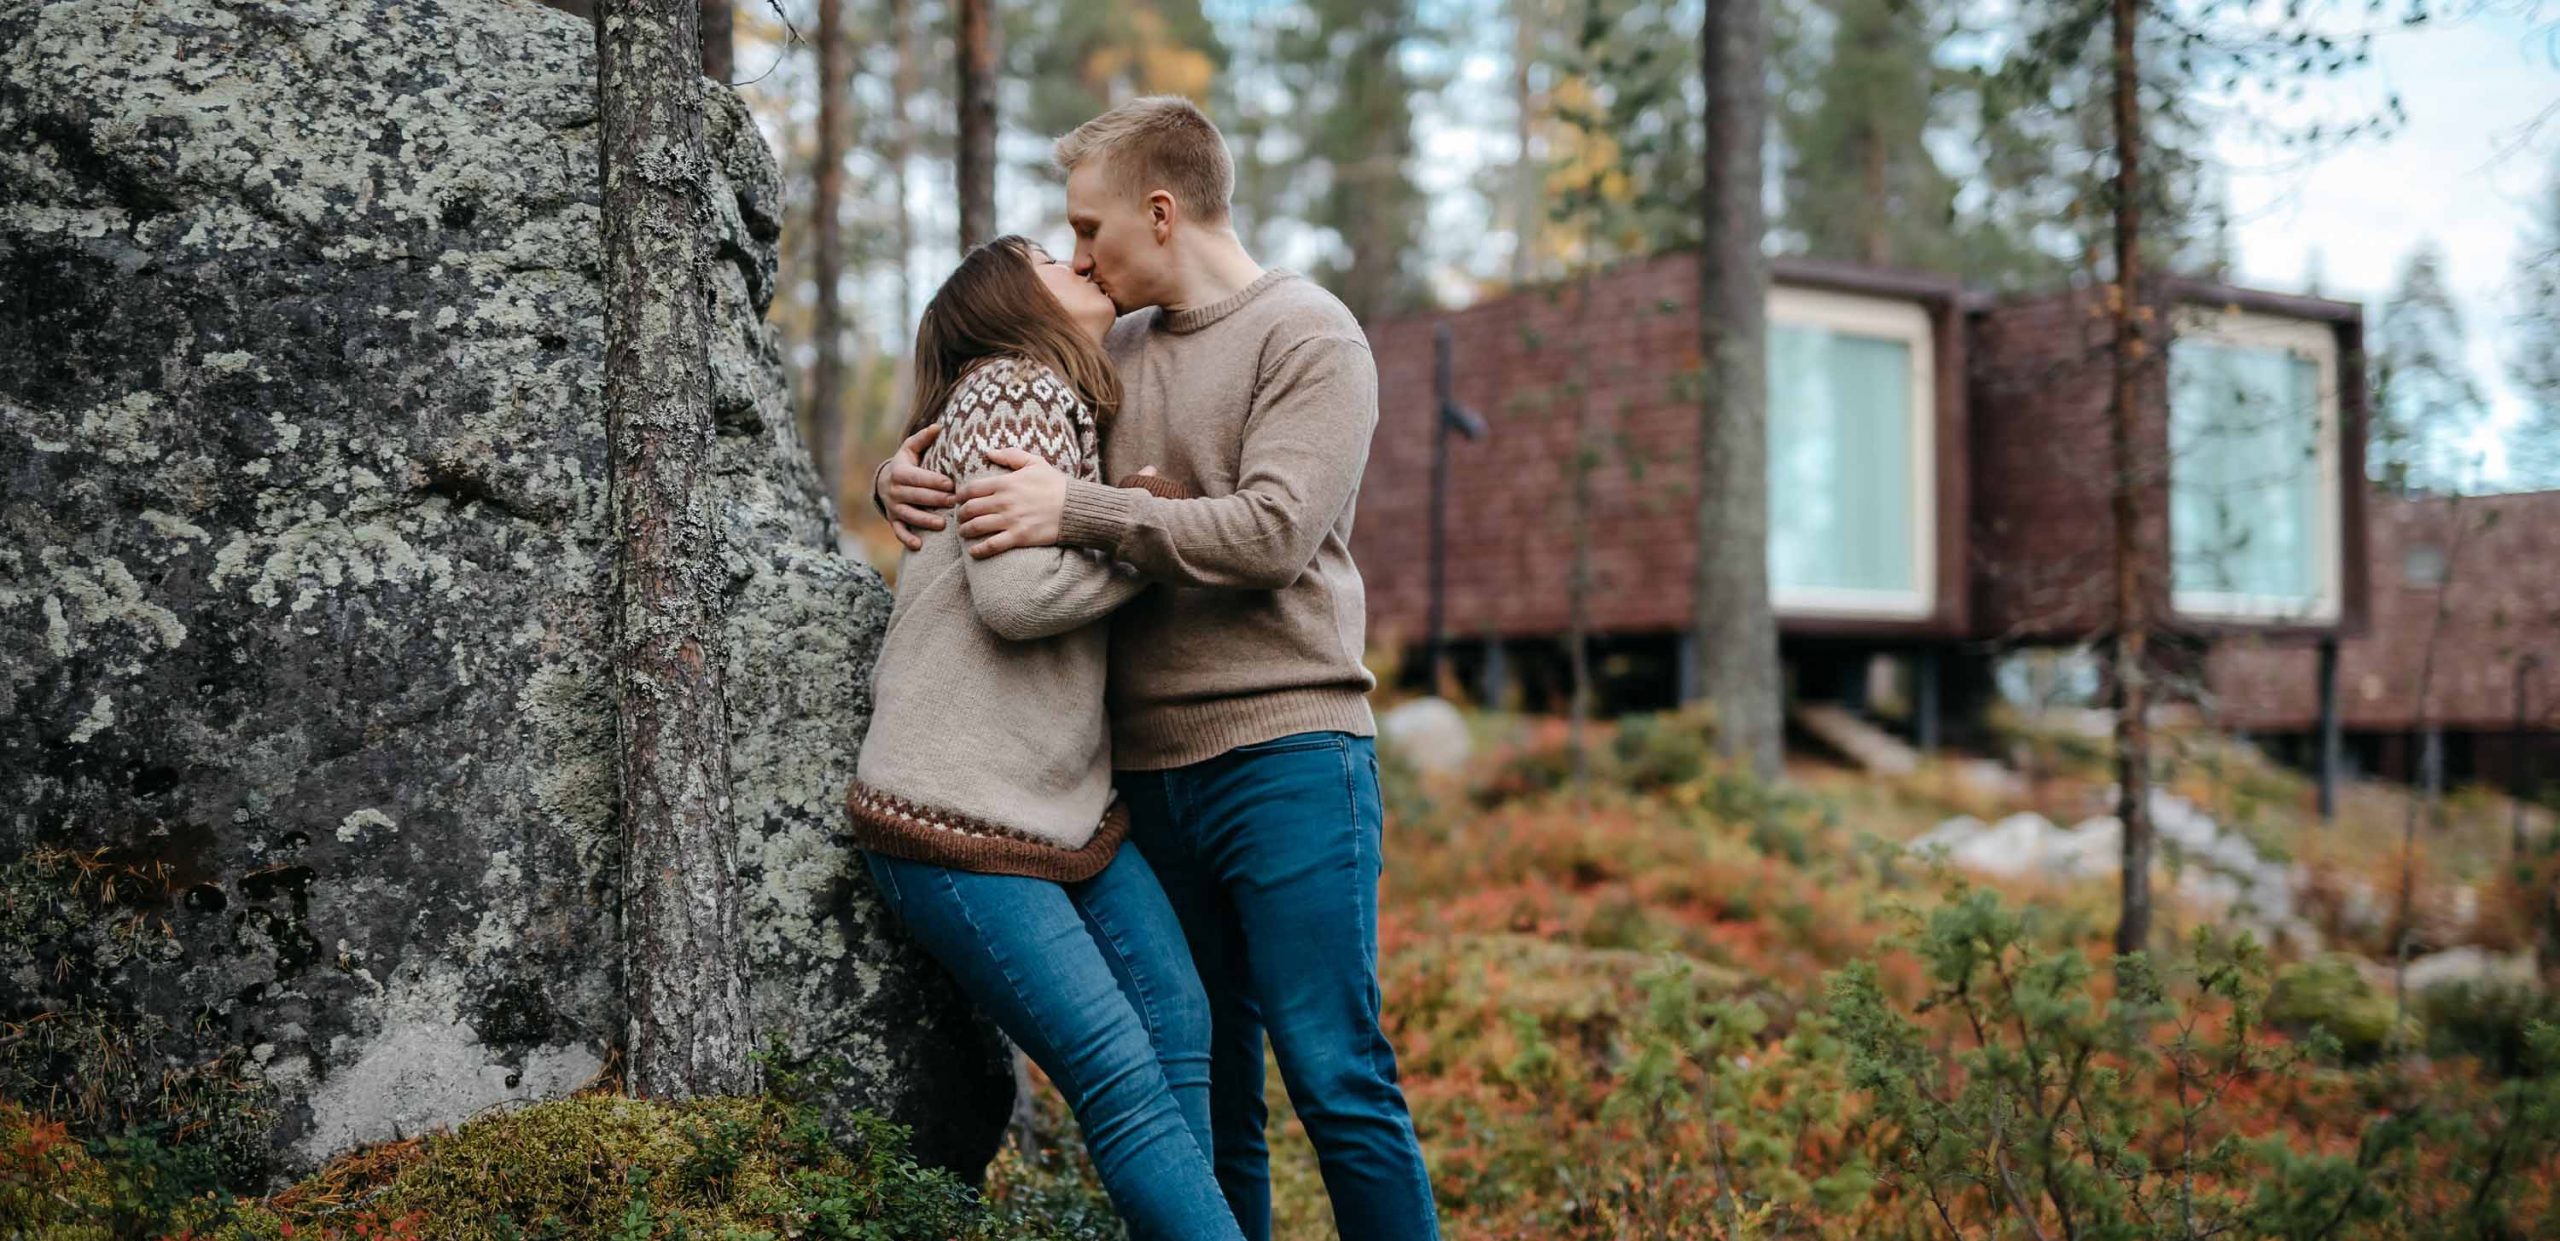 Couple kissing outdoors during autumn